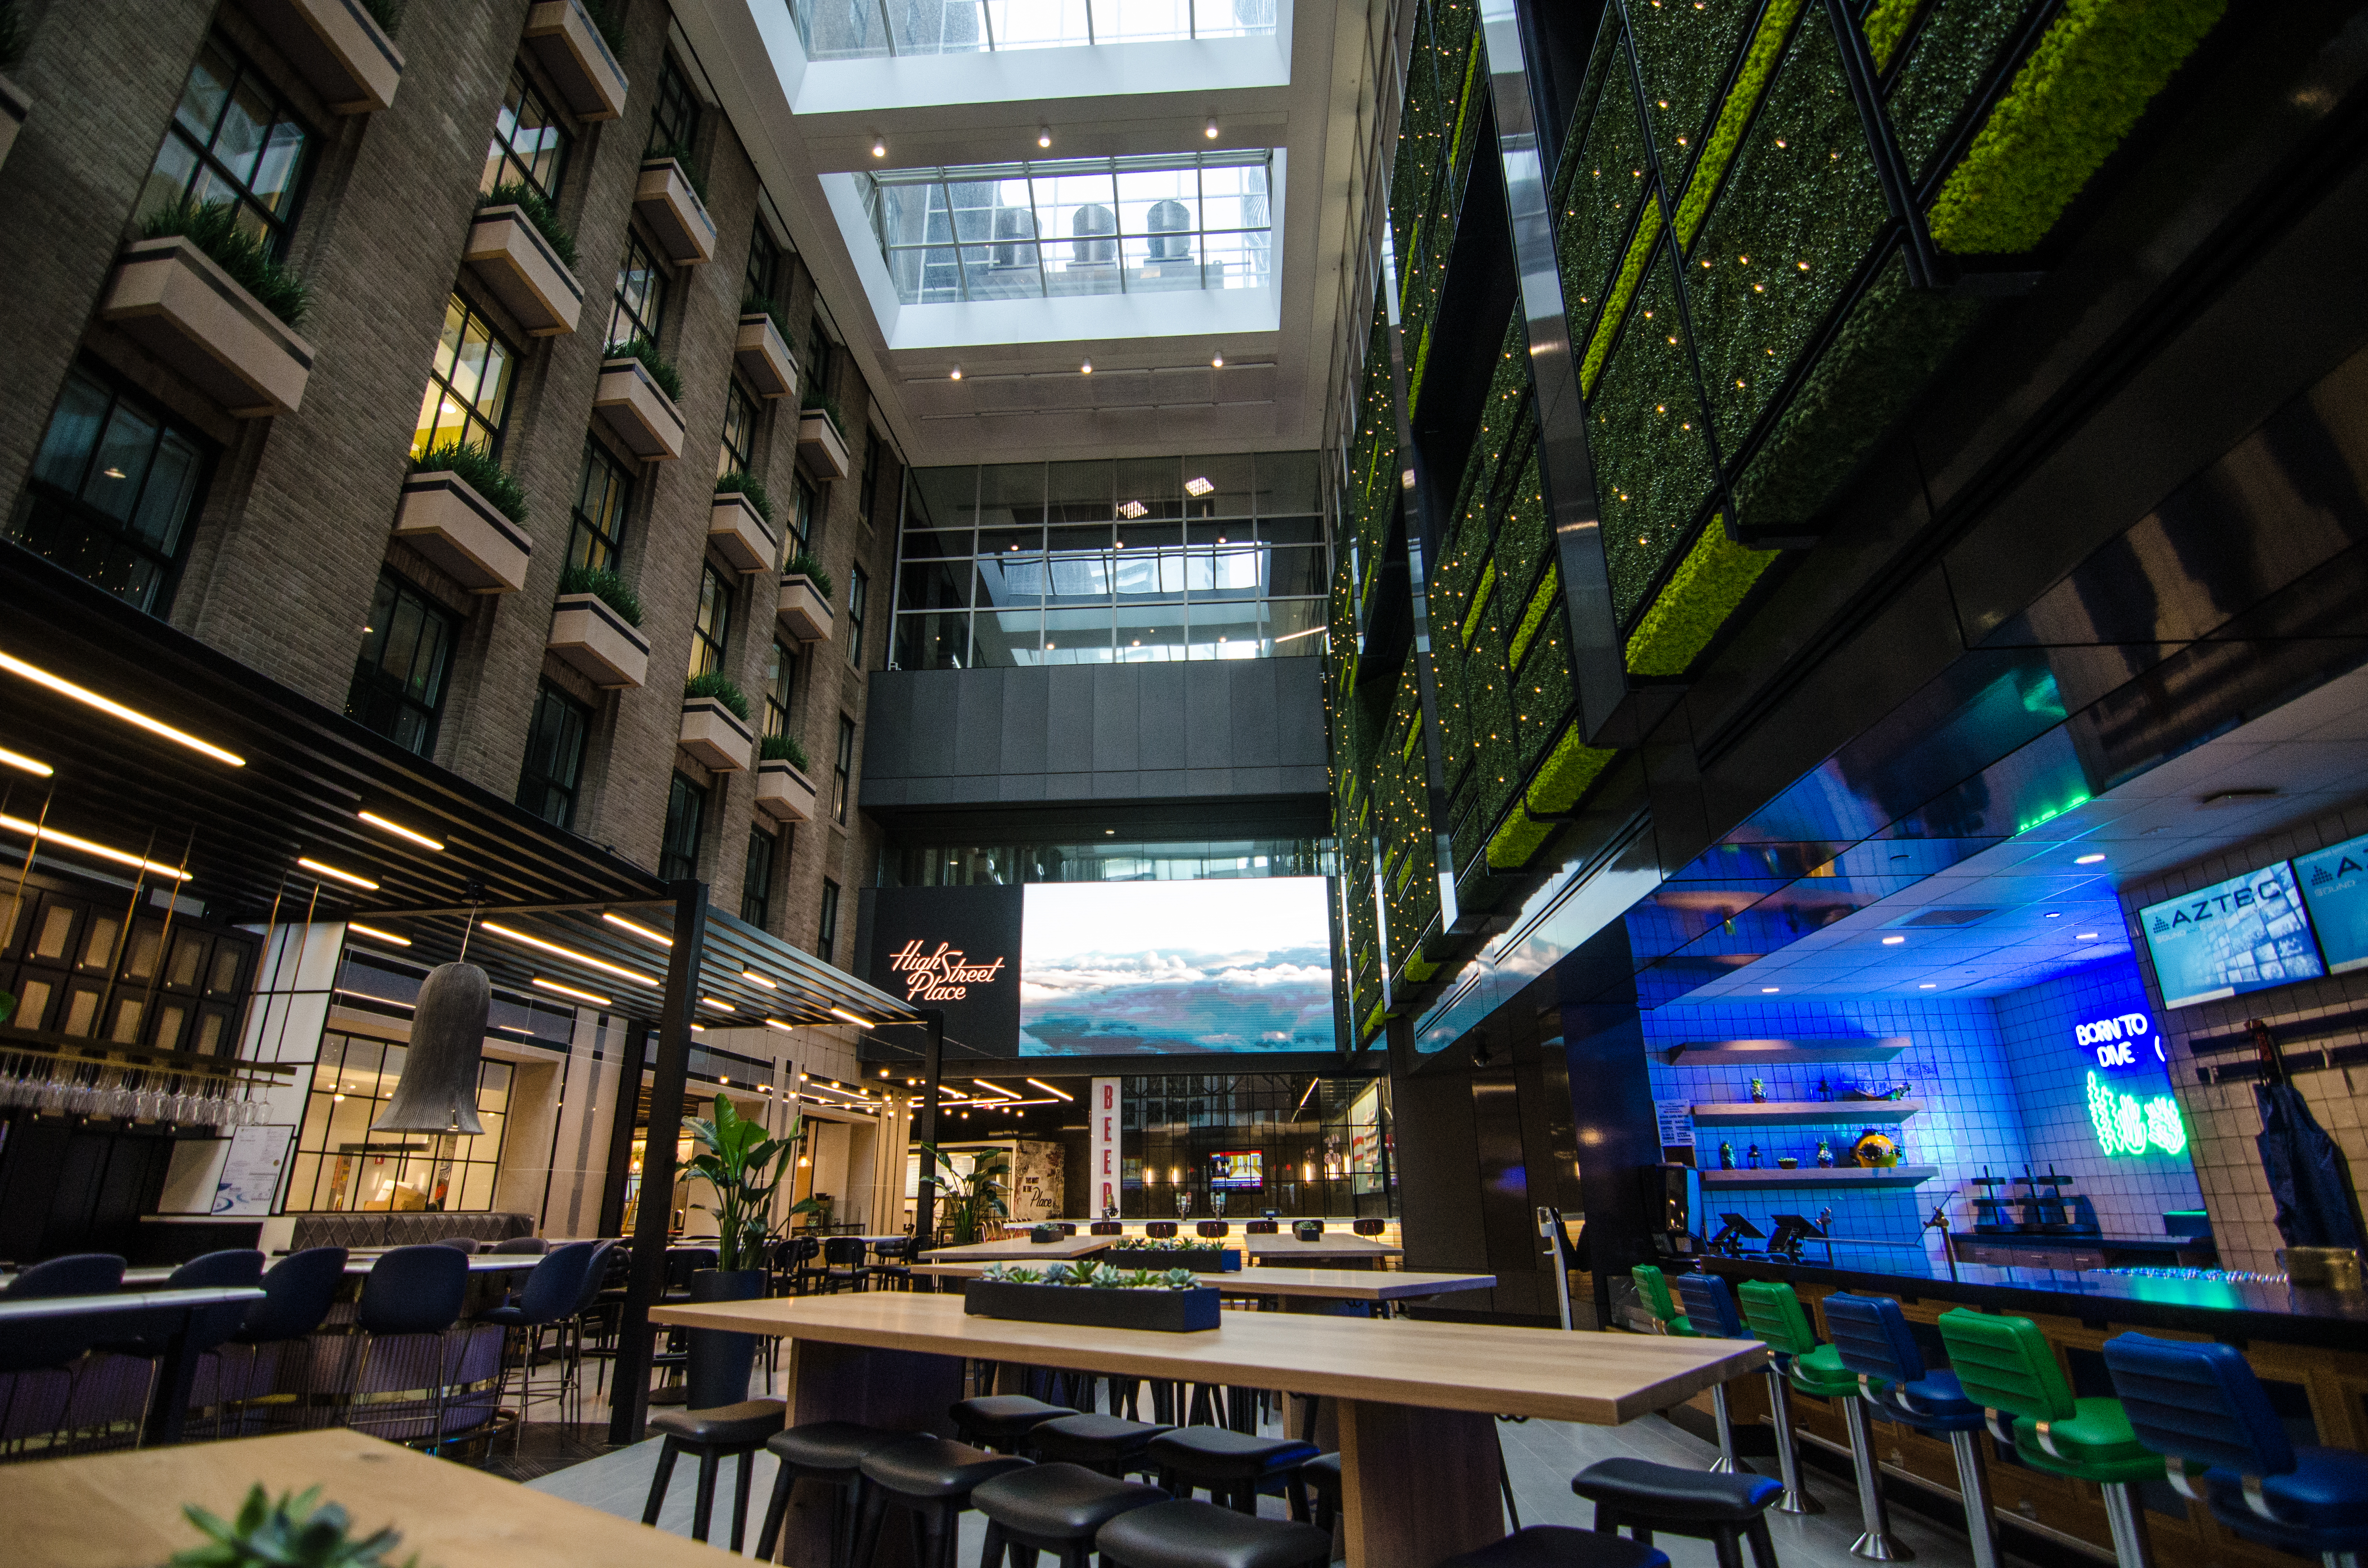 An interior view of a three-and-a-half story atrium with communal seating and a variety of food and beverage vendors. There’s also a green wall and a large video screen.